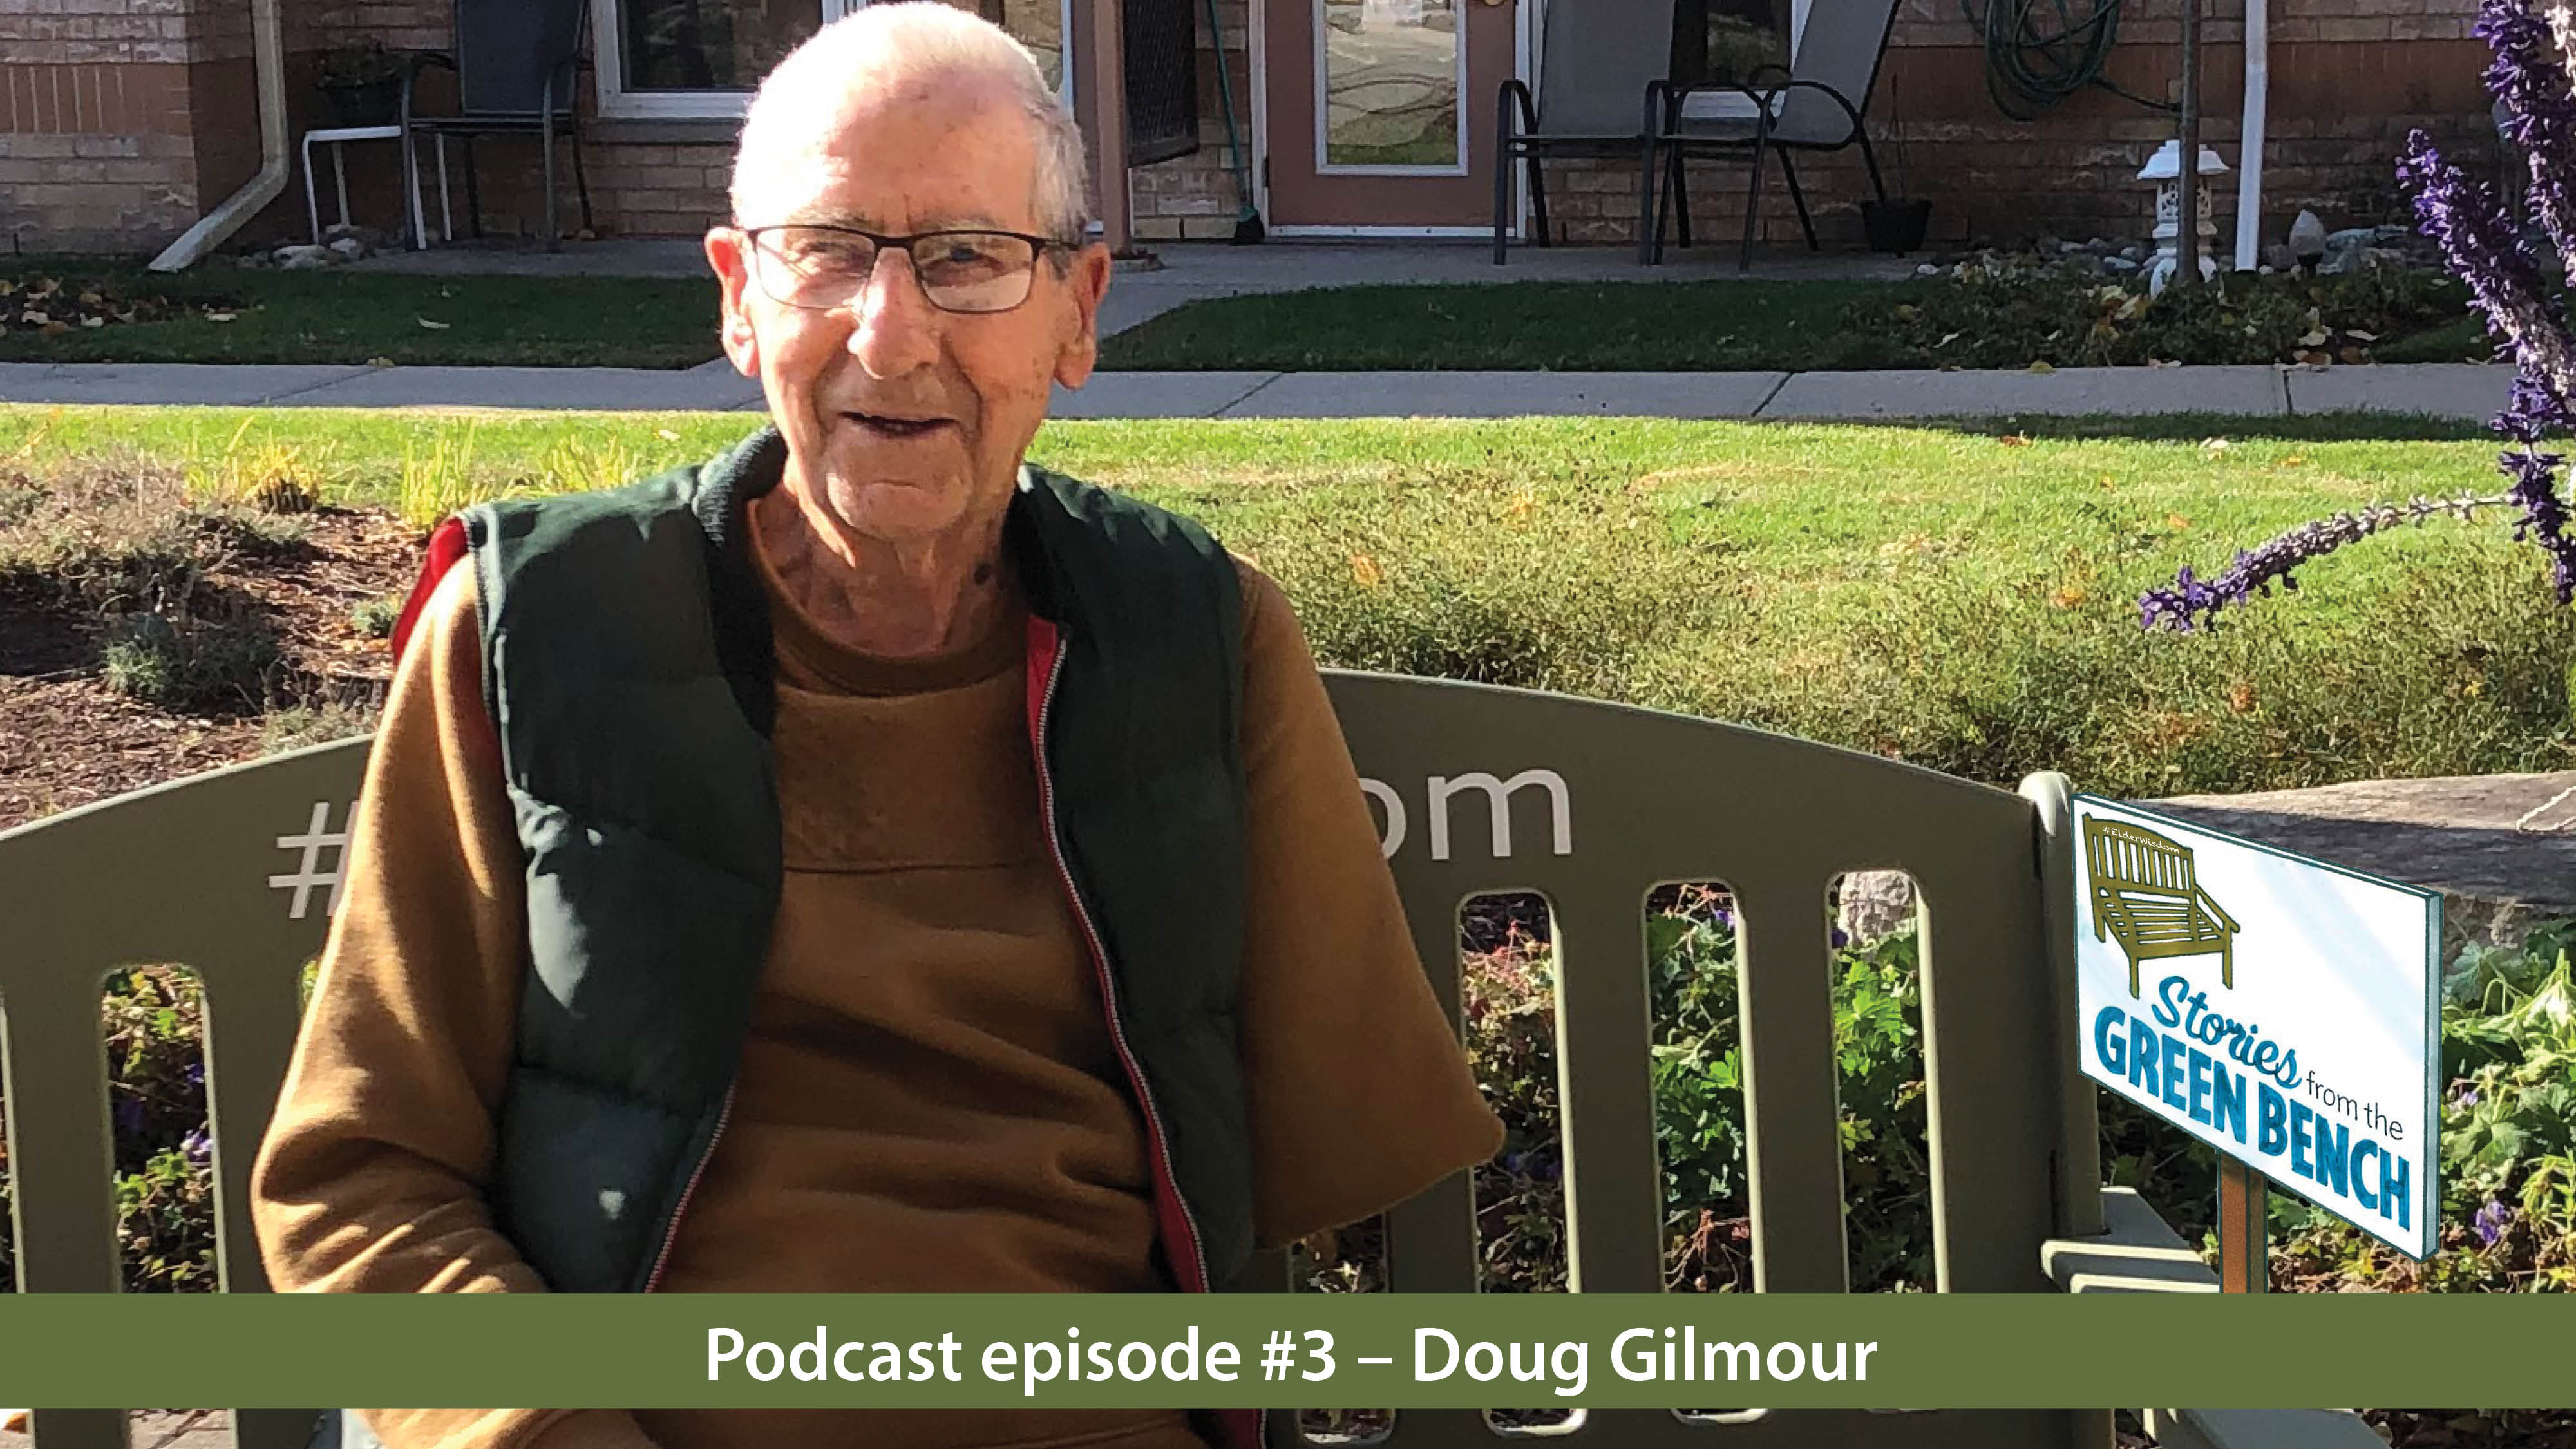 Resident Doug Gilmour sitting on the Green Bench in promotion of the Podcast Episode #3